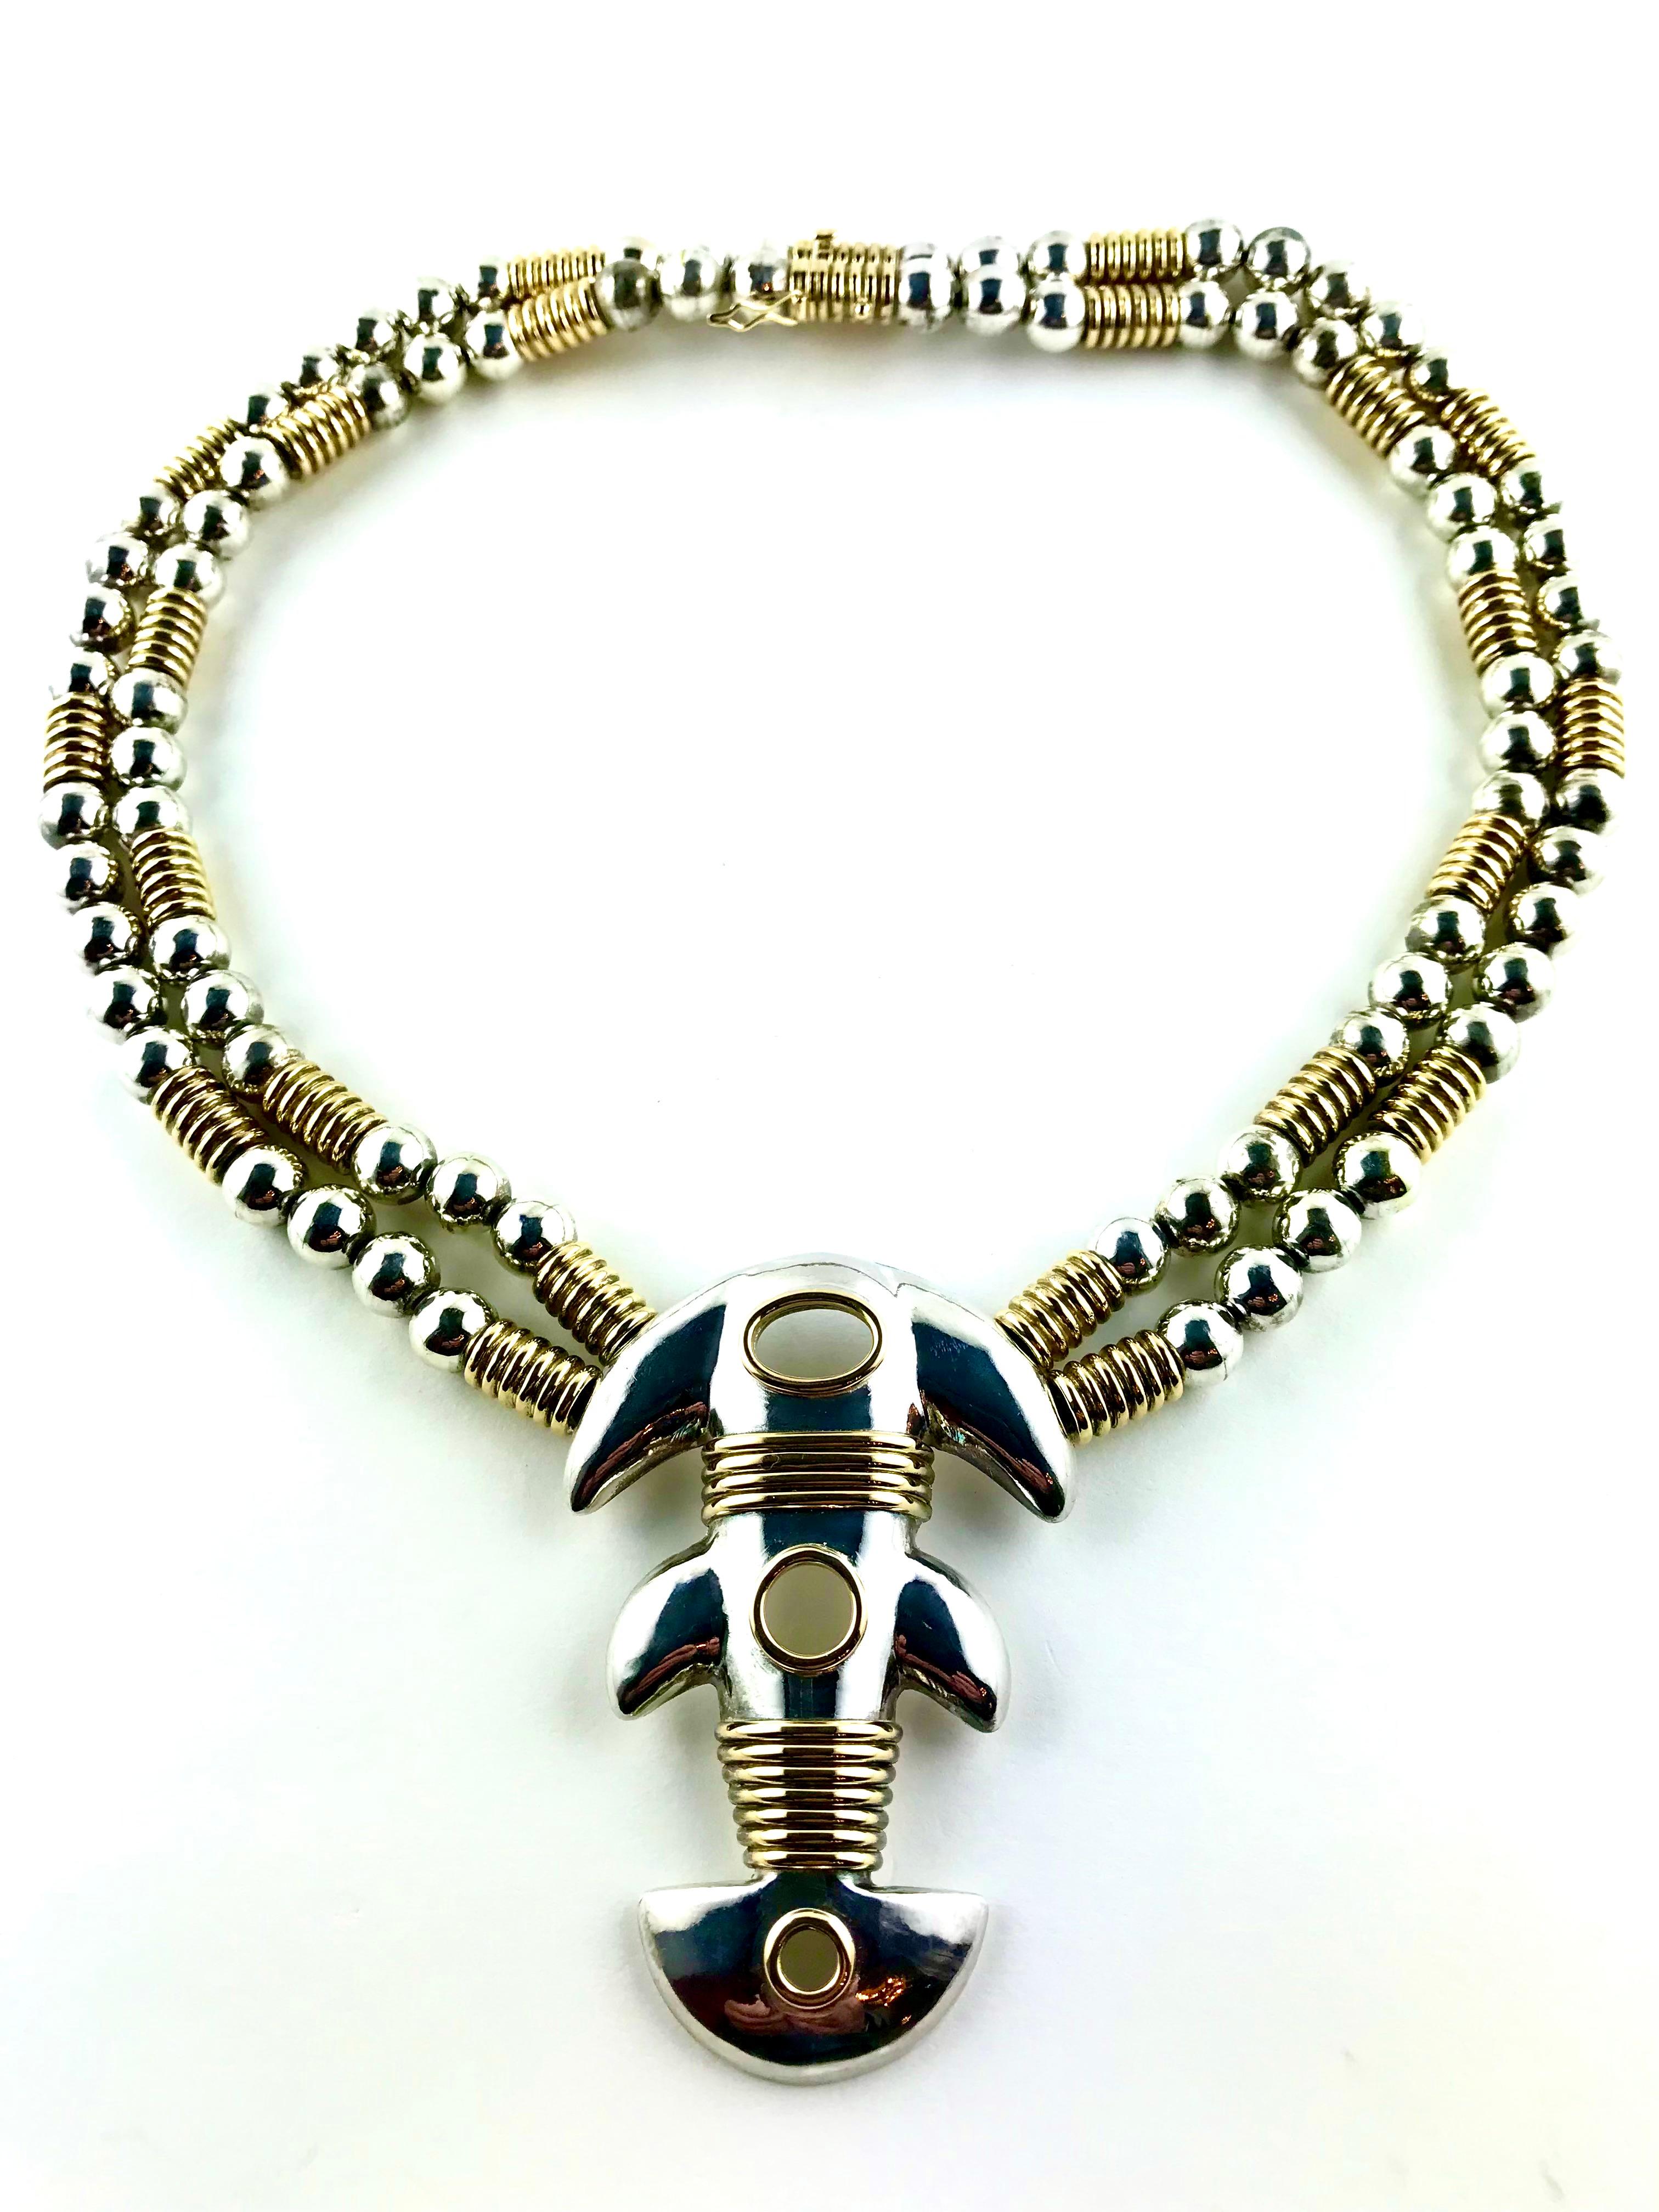 Sculptural, bold demi-parure crafted  in Yellow Gold and Silver by Greek design house Zolotas in the 1980s.  The chunky necklace features a double-stranded design with Silver spheres alterned by ribbed cylinders in 18k Gold and an eye-catching